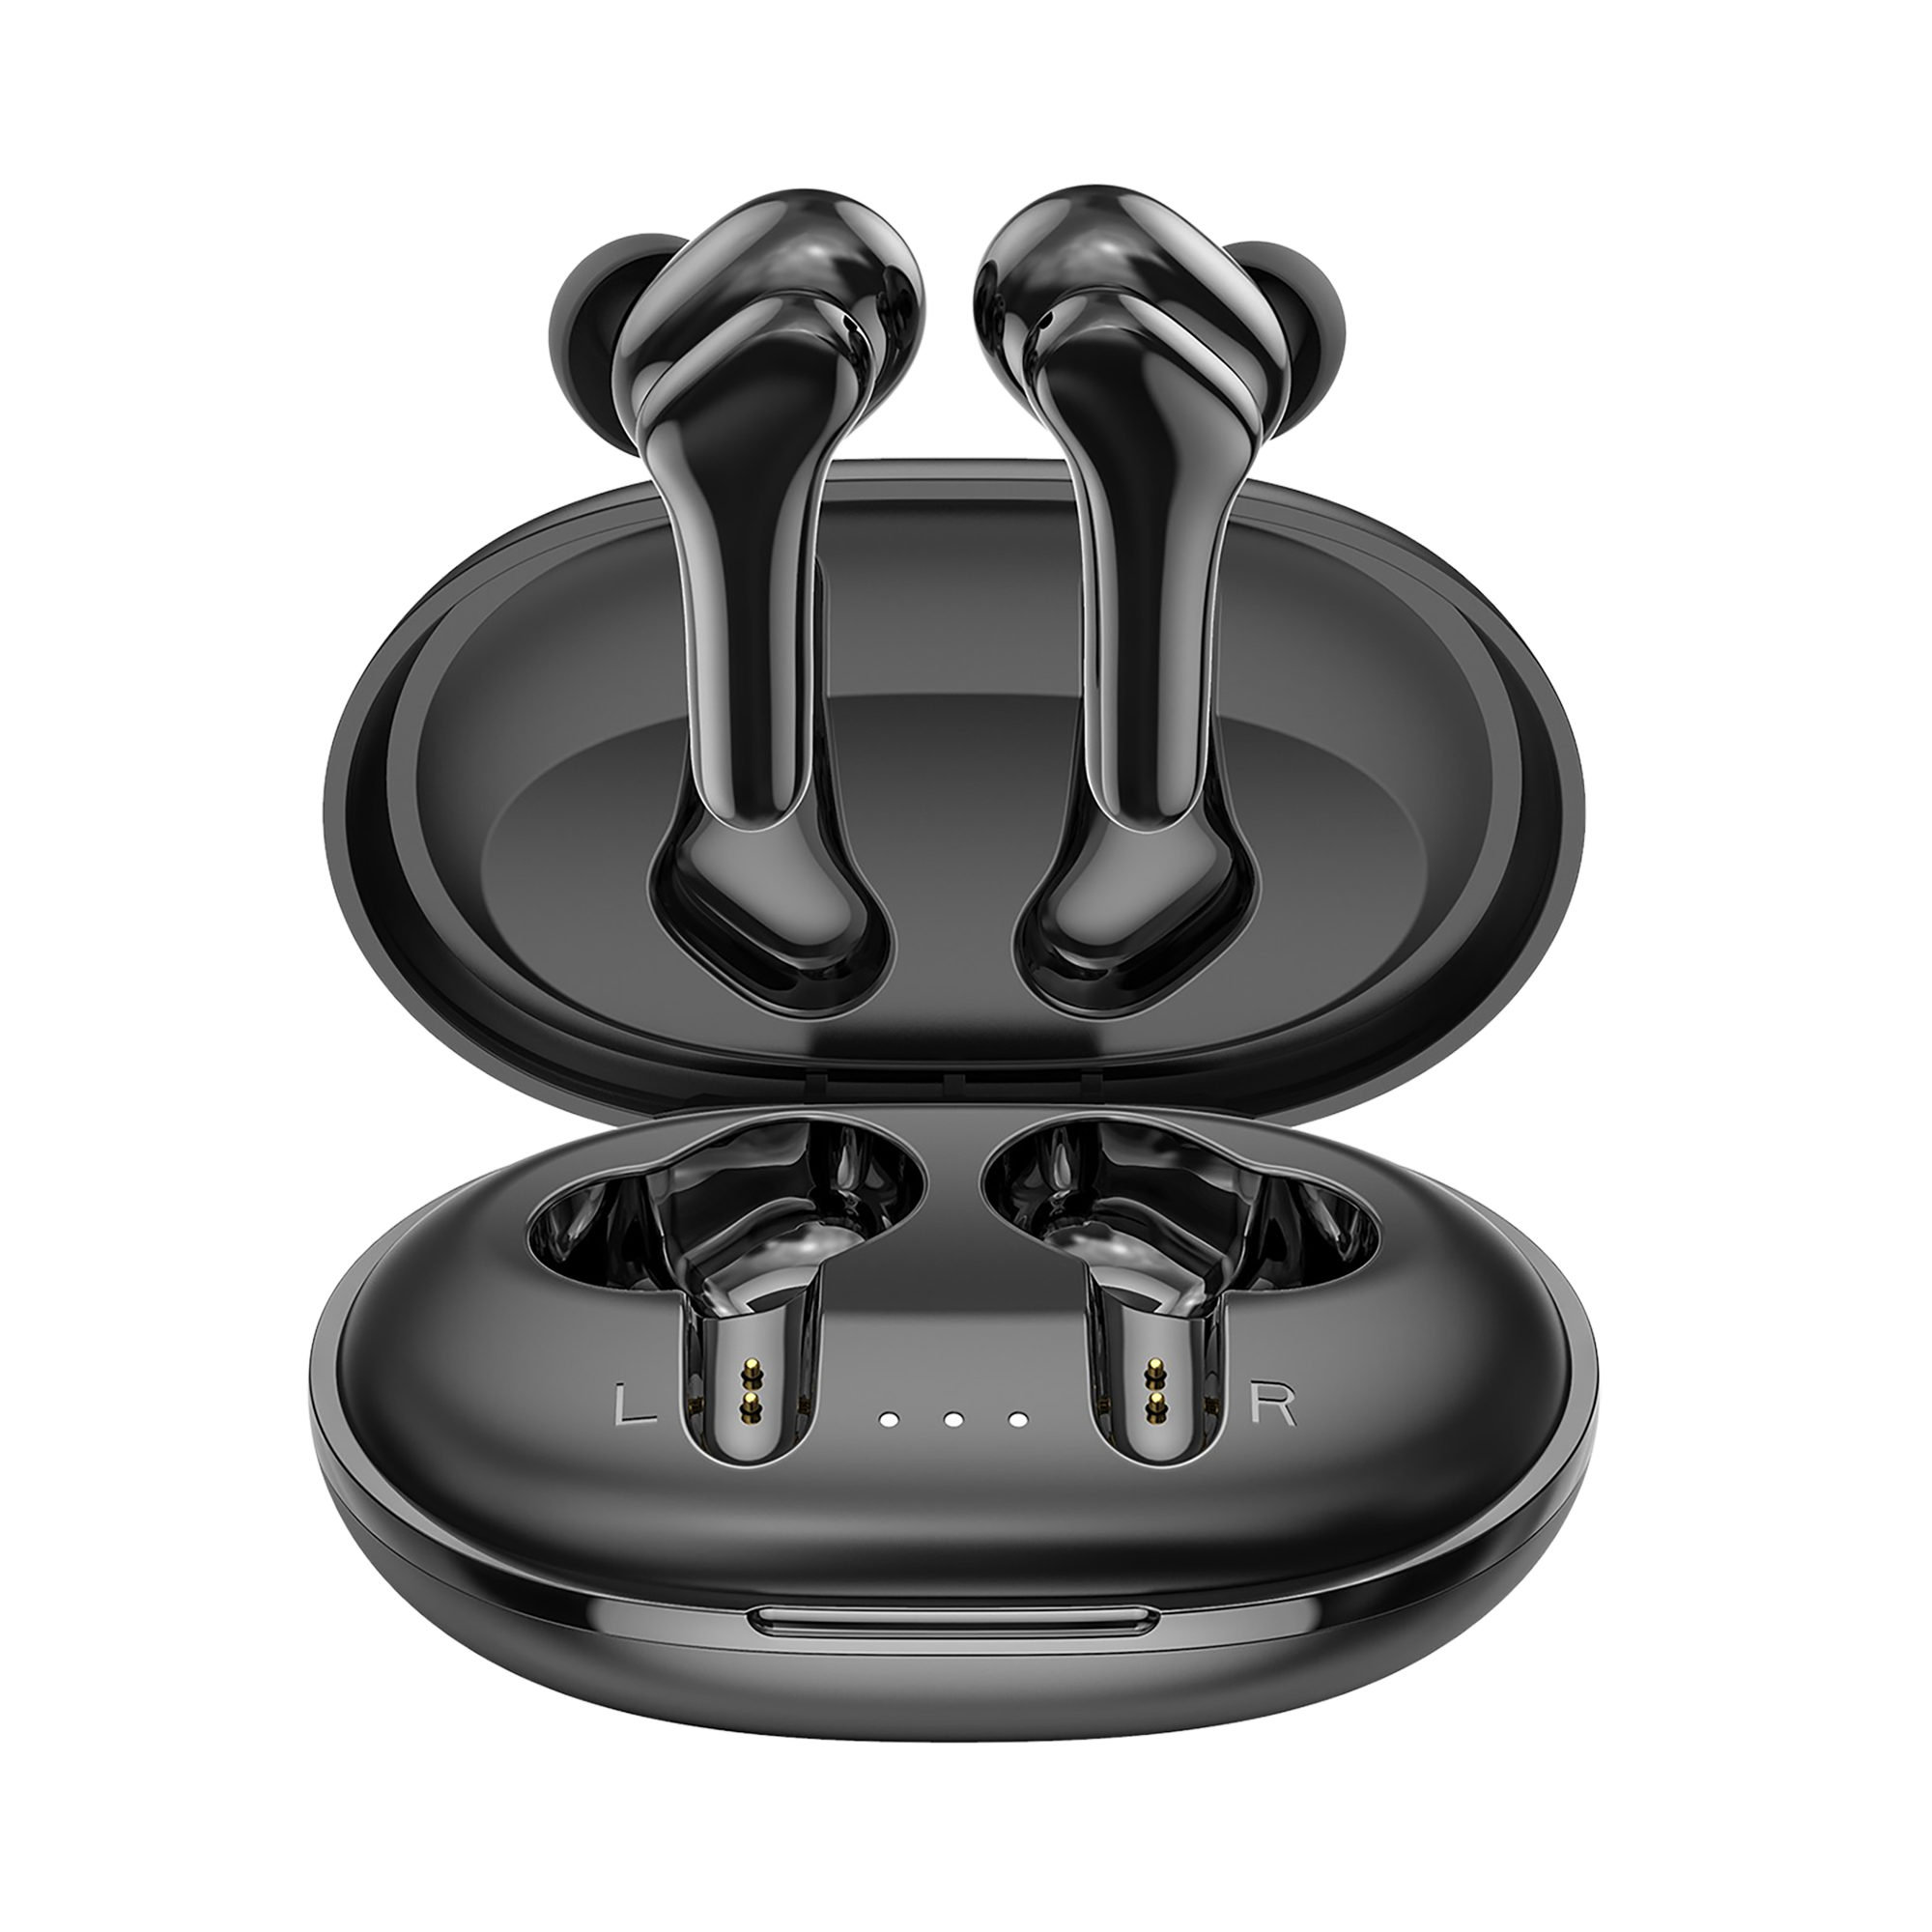 Wireless Noise Cancelling Earbuds